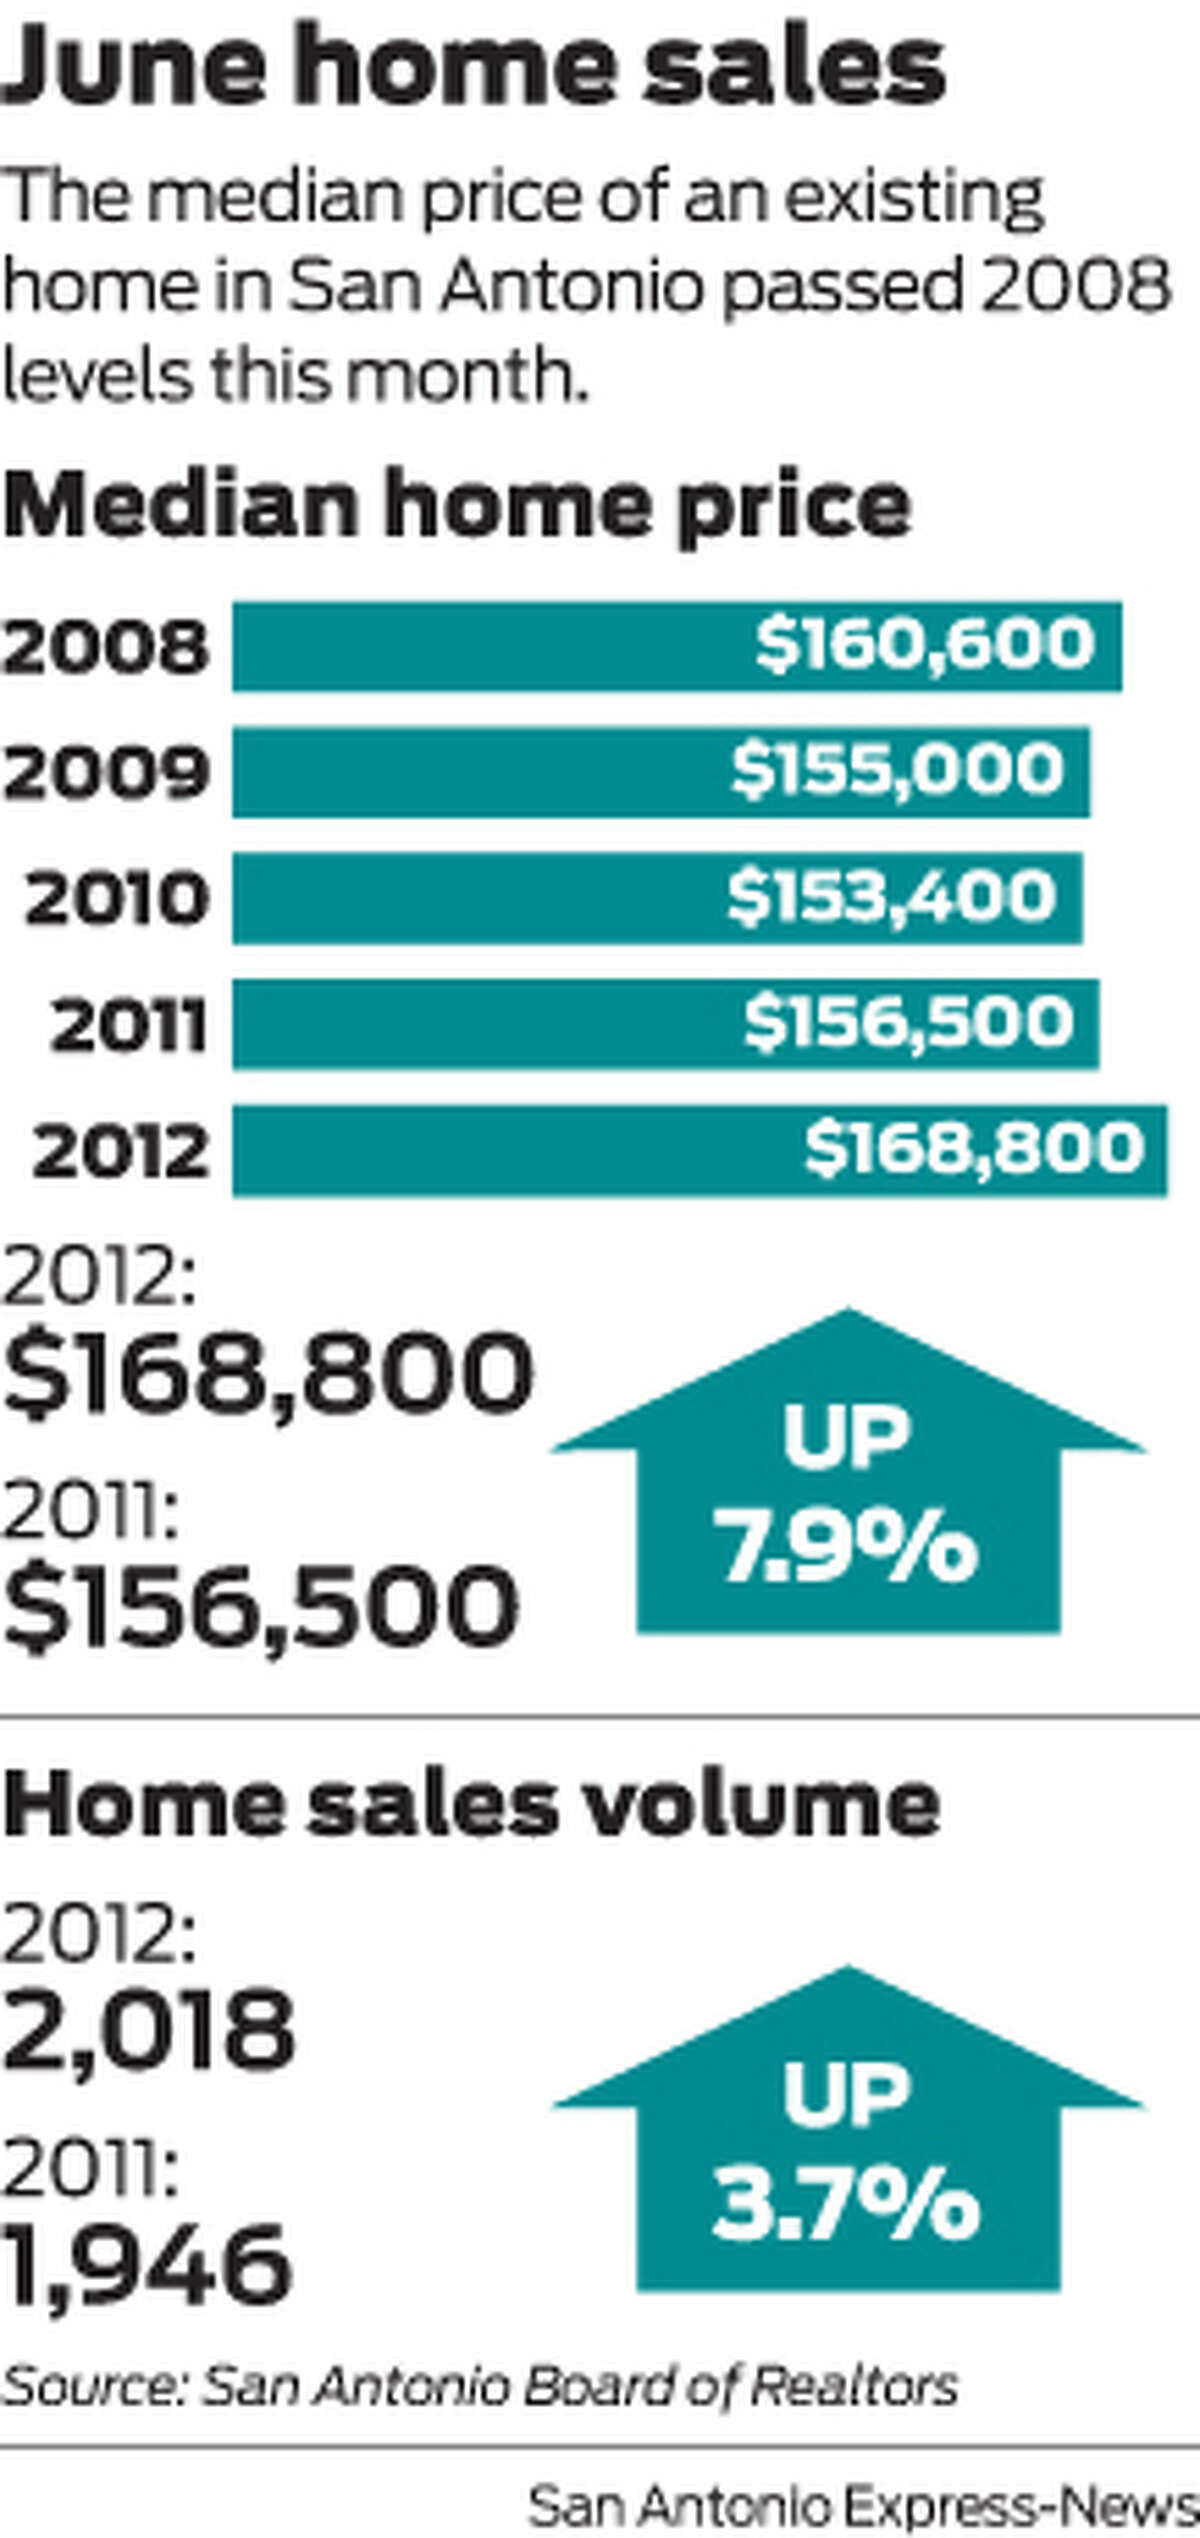 The median price of an existing home in San Antonio passed 2008 levels this month.